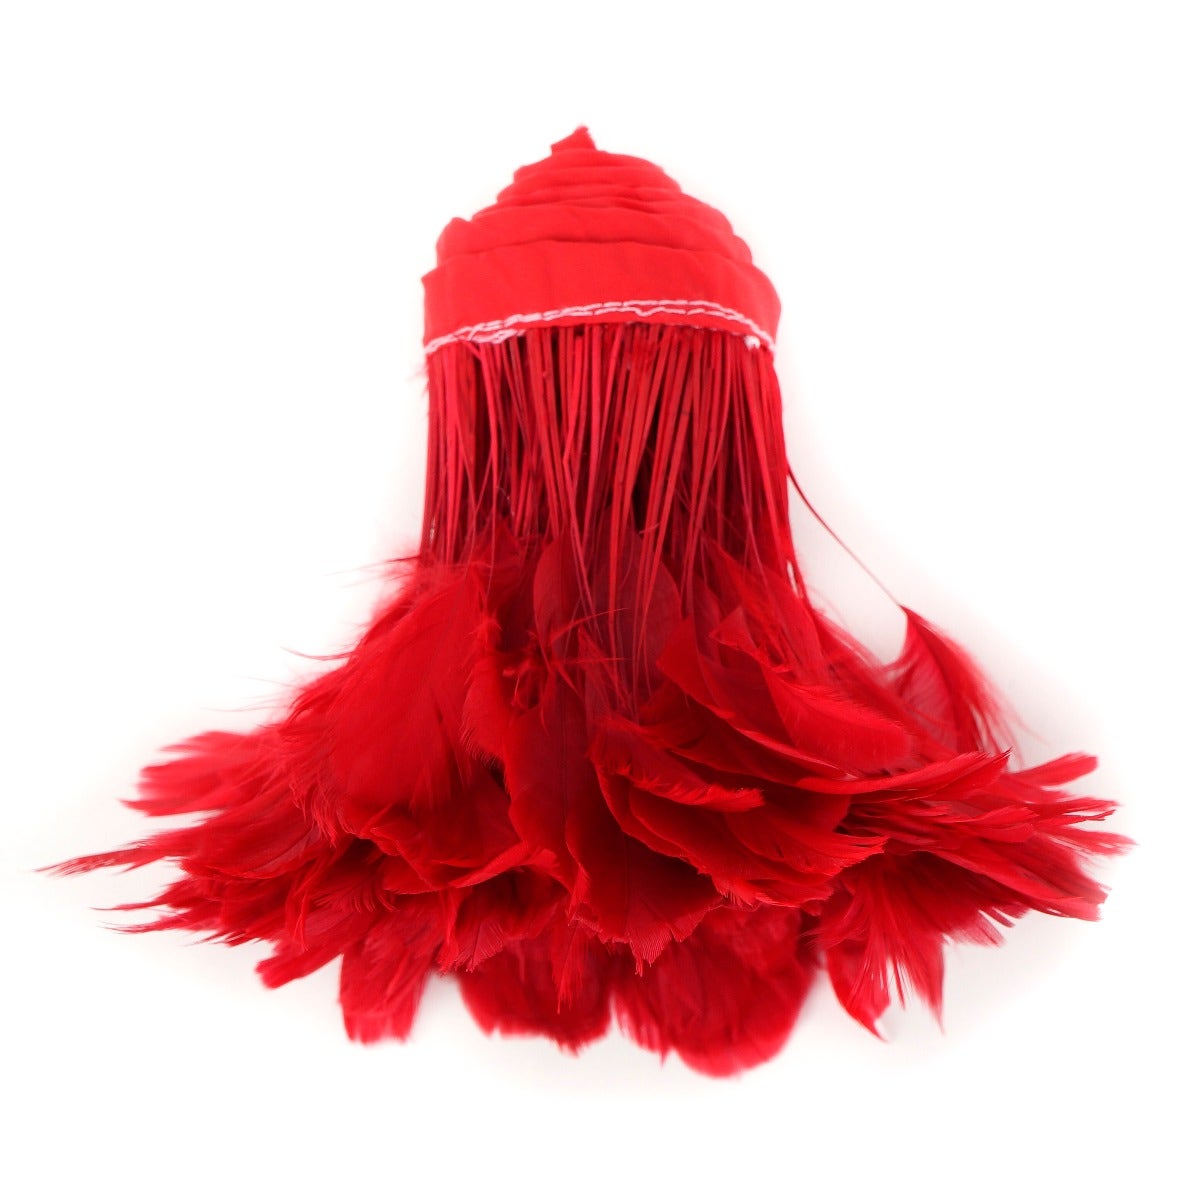 Stripped White-Dyed Coque Fringe - Red